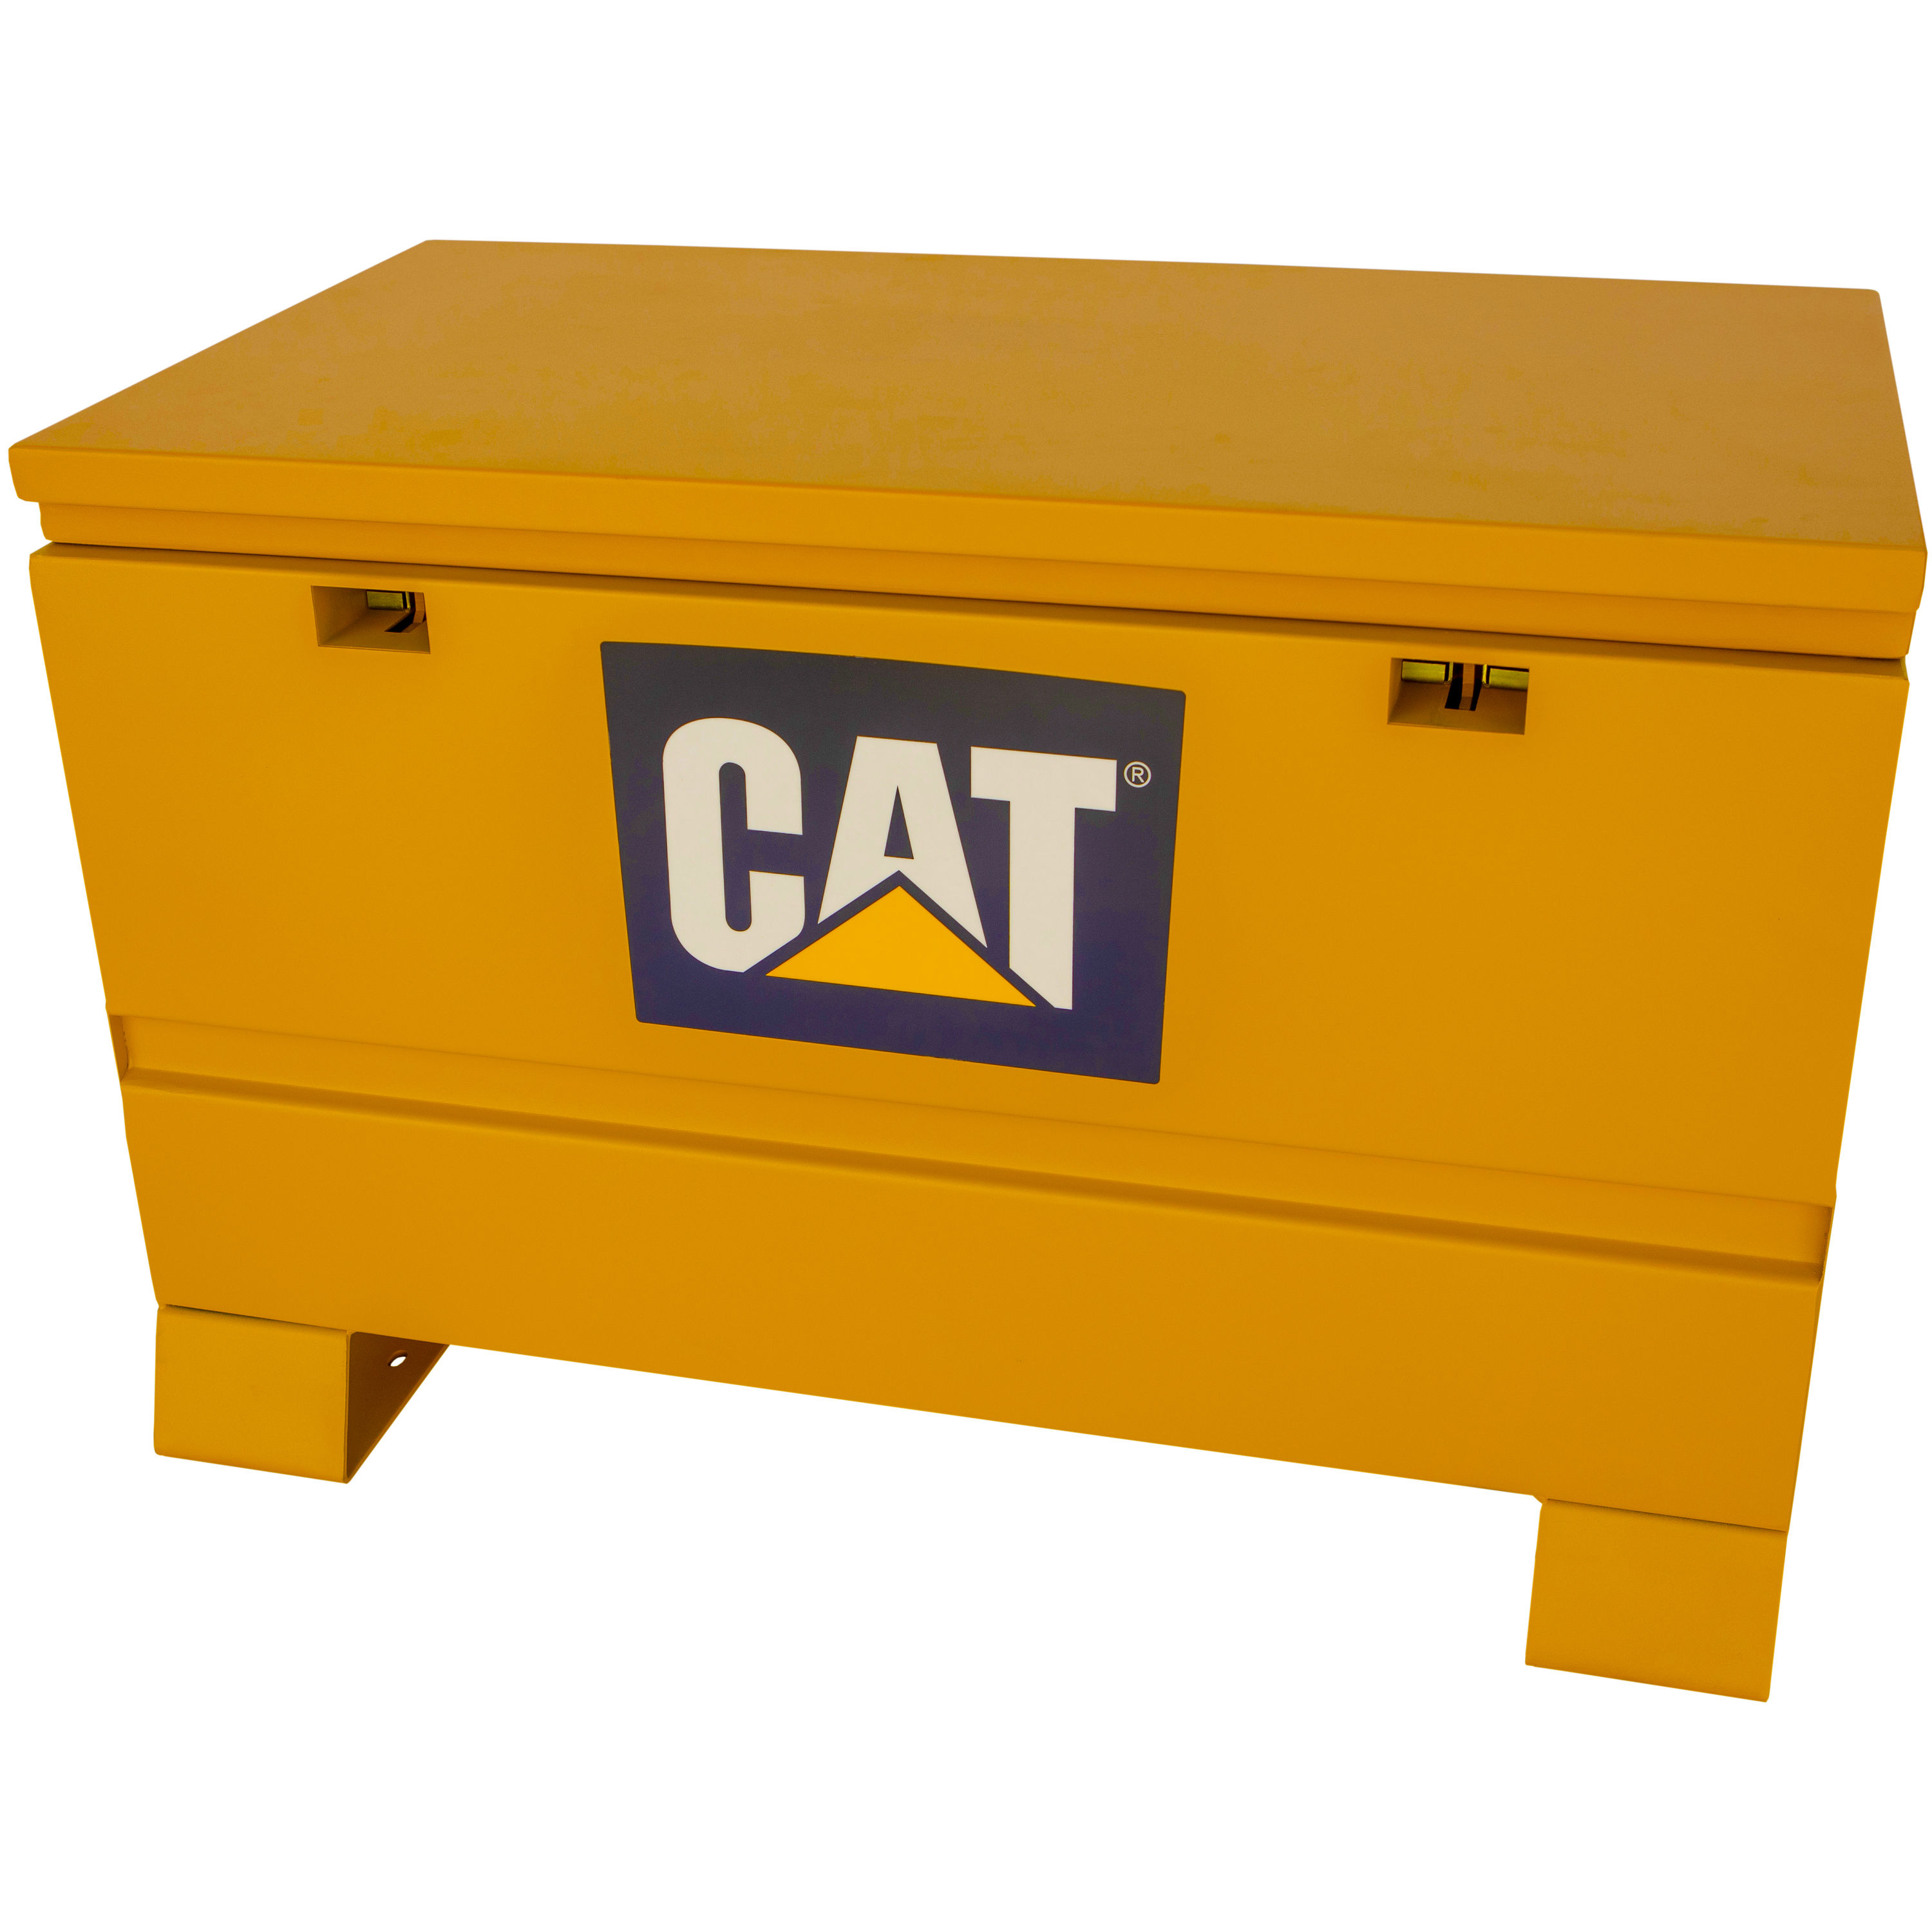 Utility/Tool Box with Lift-Out Tray: Yellow